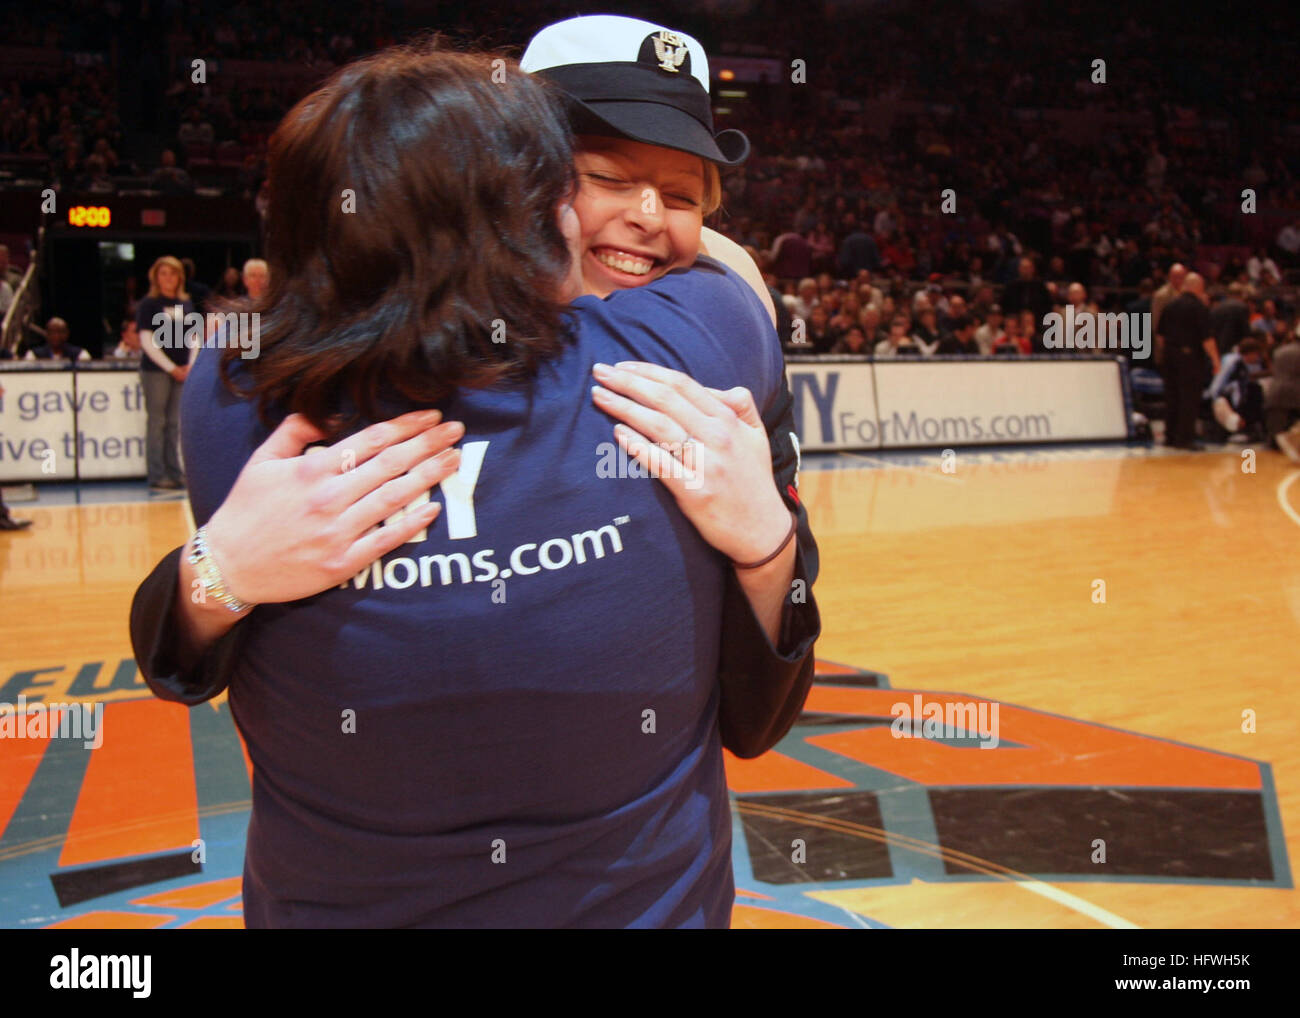 081109-N-1938G-003 MANHATTAN (Nov. 9, 2008) Damage Controlman 3rd Class Dana Cox, a firefighter aboard the amphibious assault ship USS Bataan (LHD 5), embraces her mother, Diana Russell, from Lancaster, Penn., during the New York Knicks vs. Utah Jazz basketball game in Manhattan. Their unexpected reunion was arranged as part of a military appreciation event sponsored by NavyForMoms.com, a Web site for mothers of Navy Sailors and mothers who have questions about Navy life. Nearly 1,500 Sailors and Marines from Bataan are in New York for a week of community outreach events, public tours, partici Stock Photo